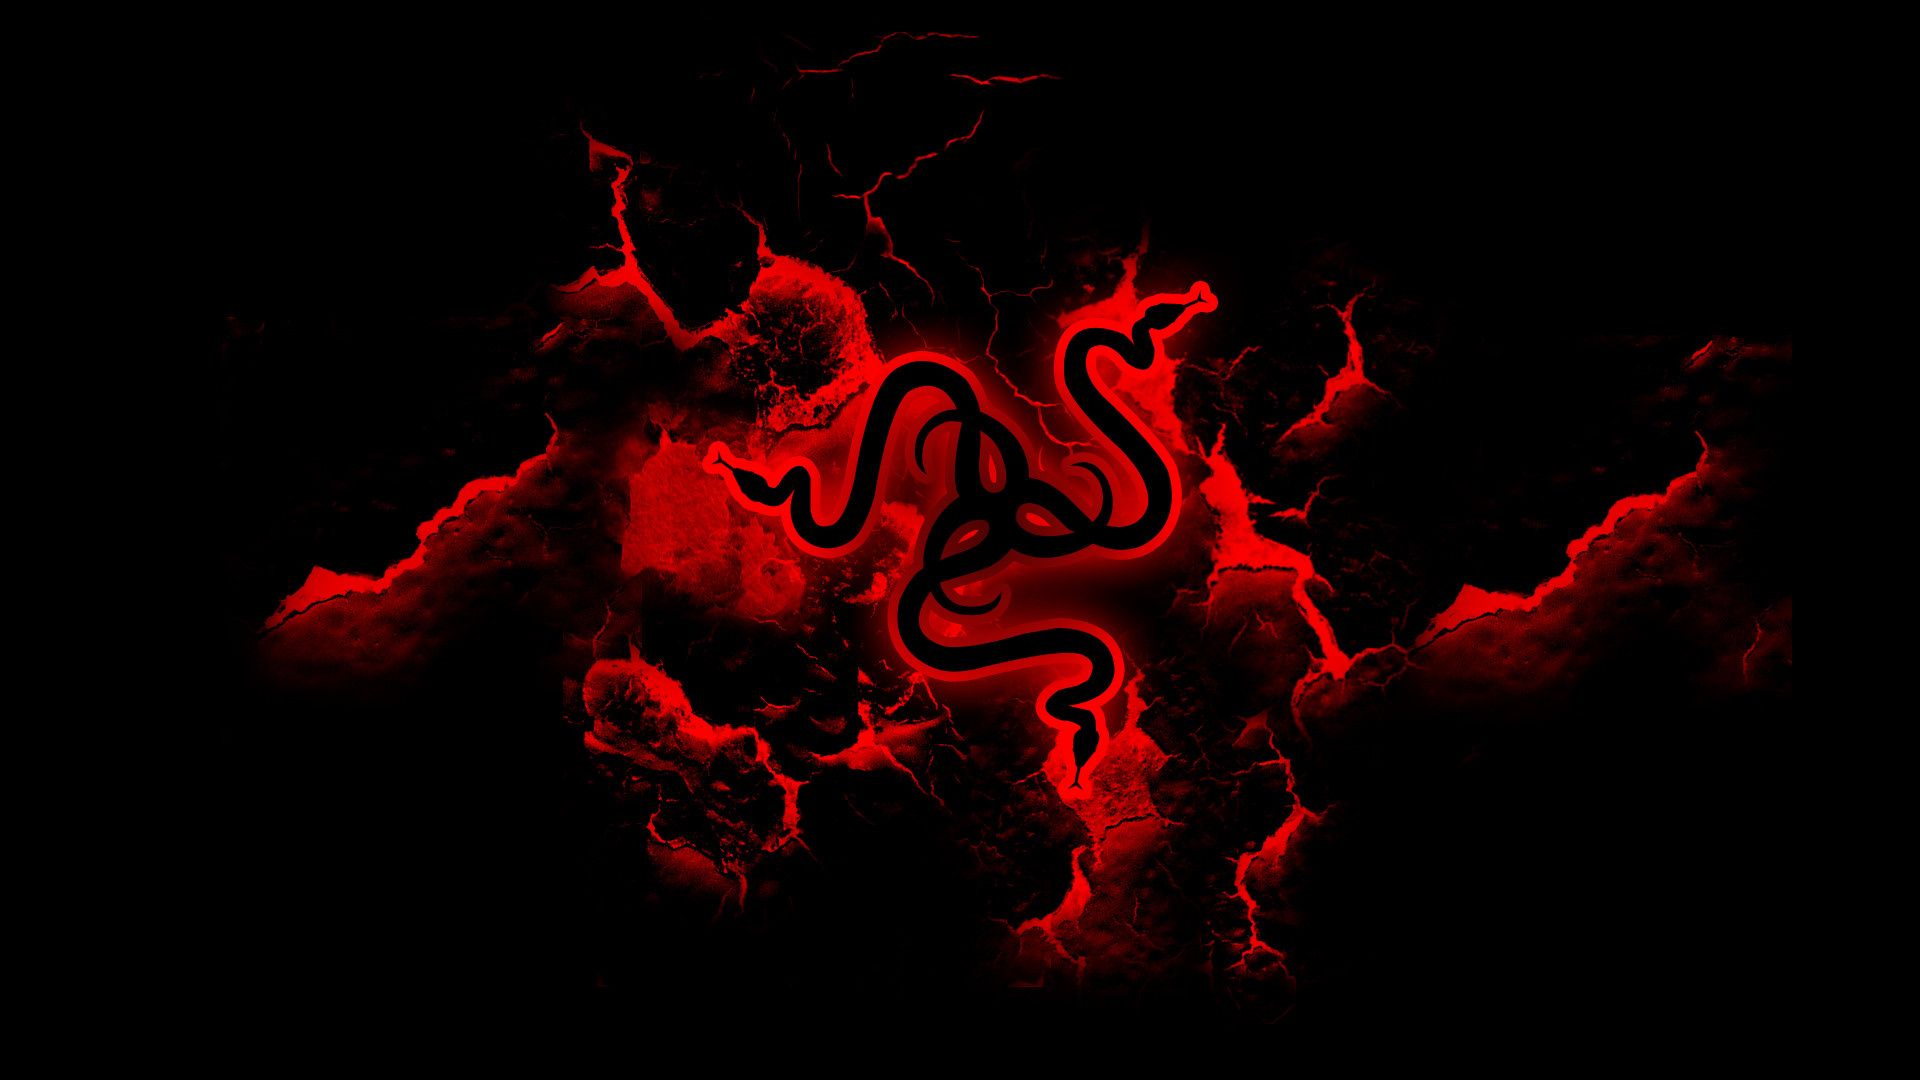 Red Razer Wallpapers Hd - Red And Black Razer - HD Wallpaper 